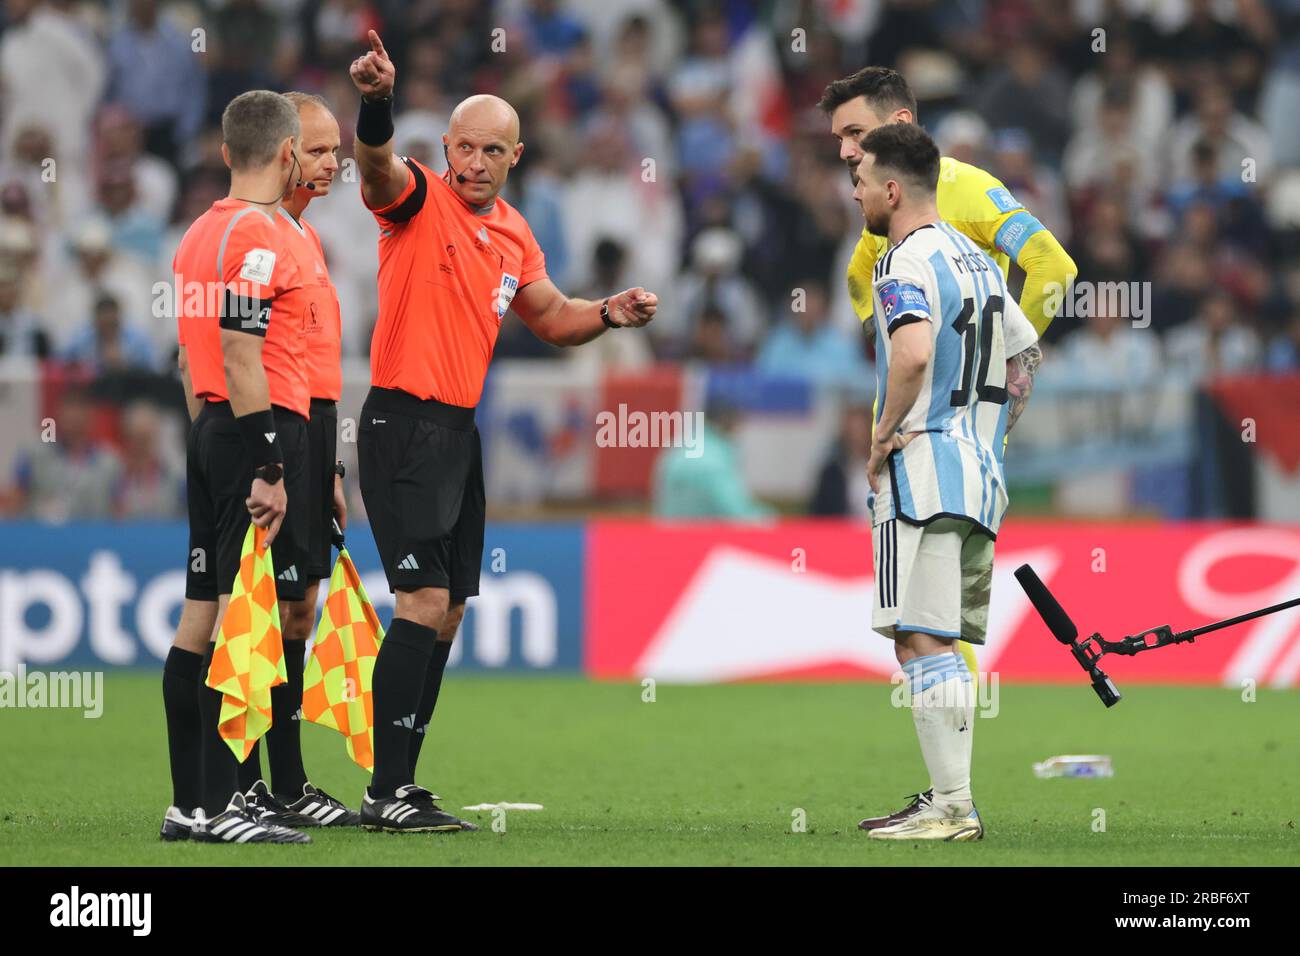 Lusail, Qatar, 18th. December 2022. The draw for penalties during the match between Argentina vs. France, Match 64, Final match of the Fifa World Cup Stock Photo